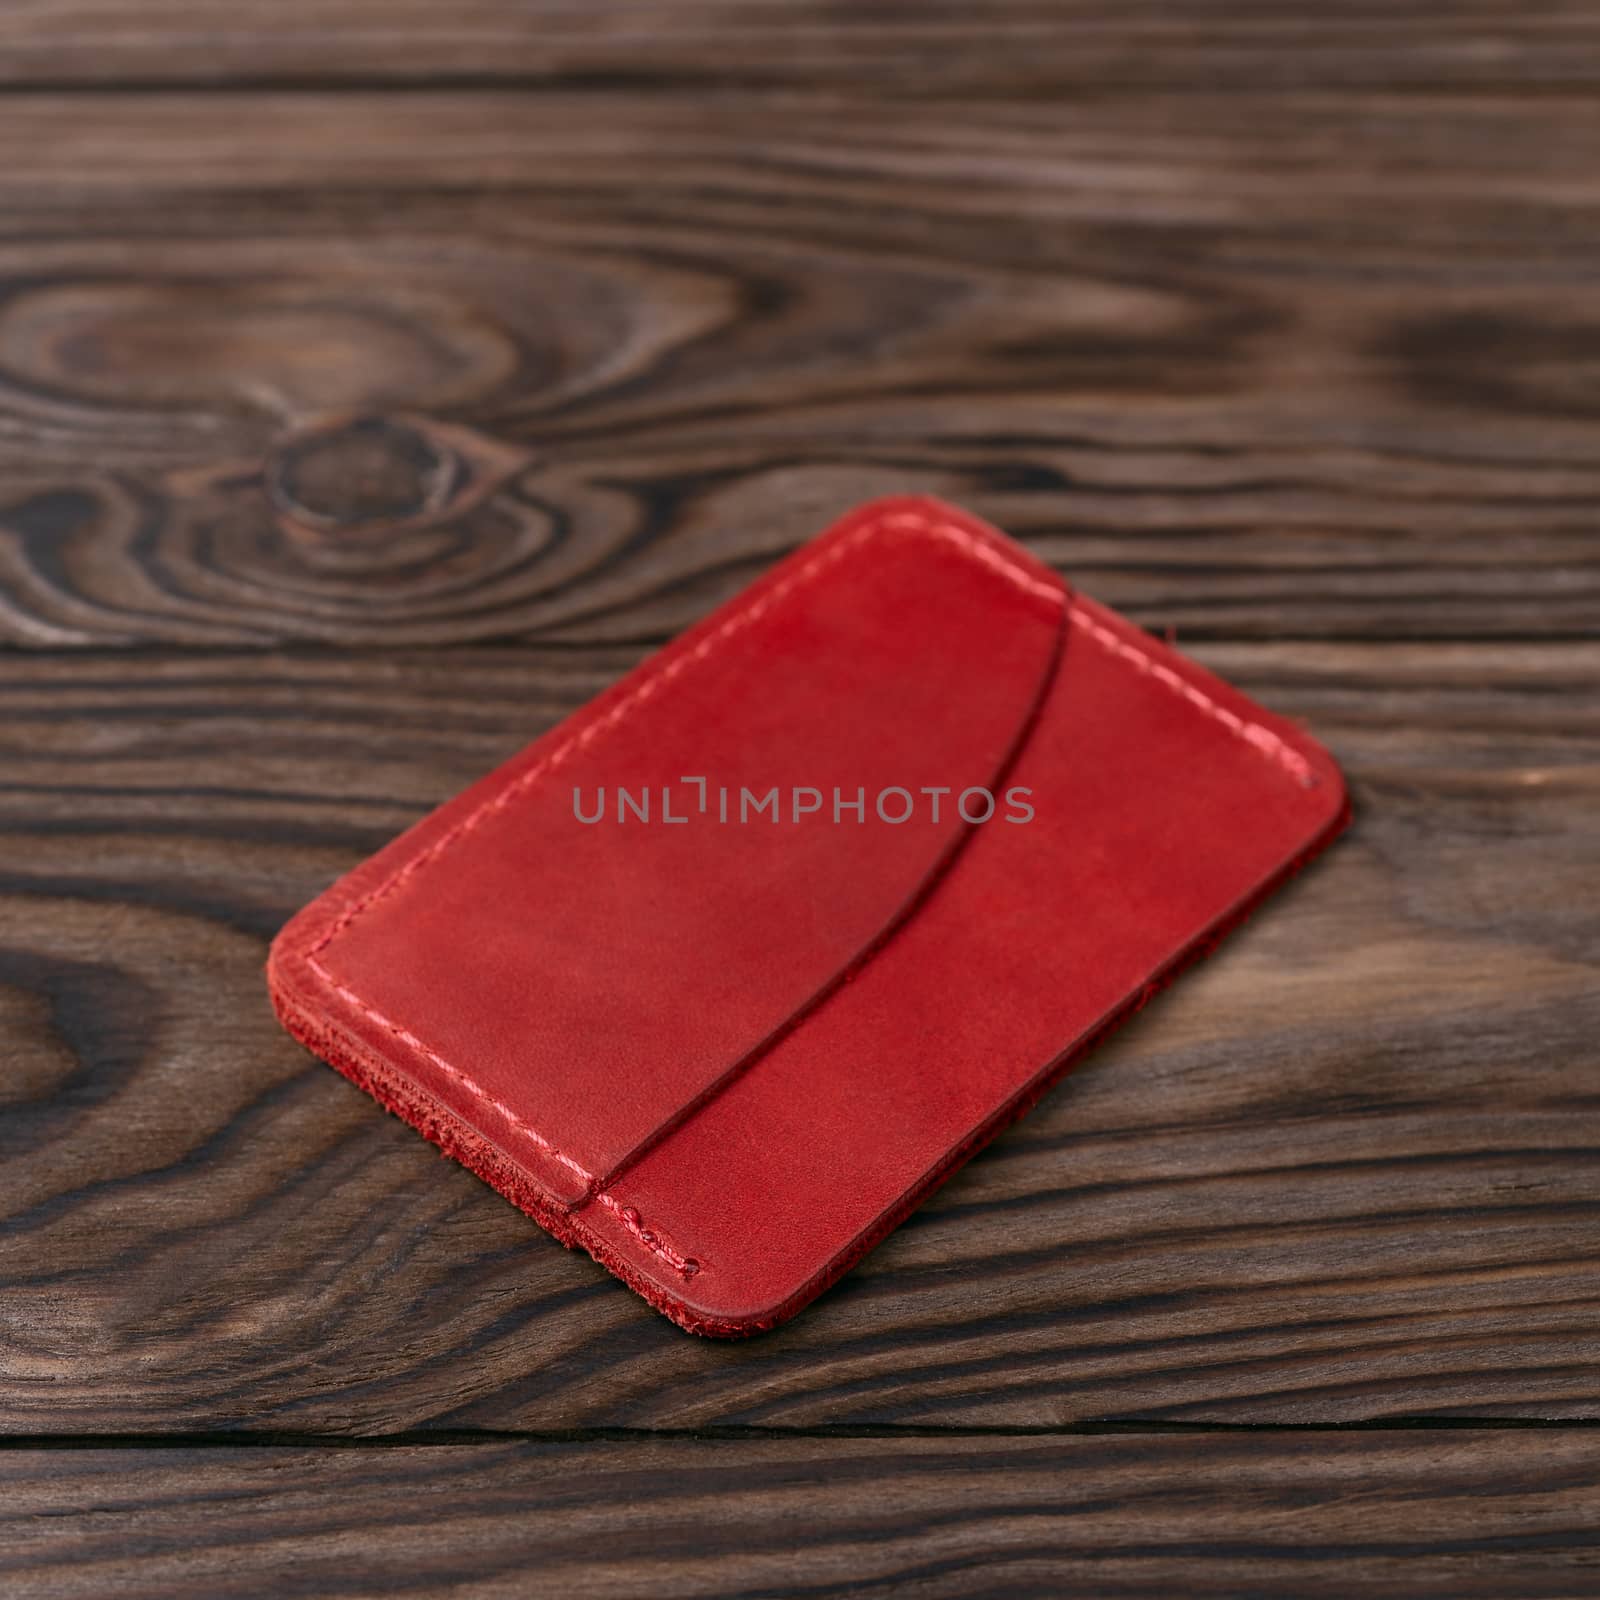 Red colour handmade leather one pocket cardholder on wooden background. Stock photo with soft blurred background.